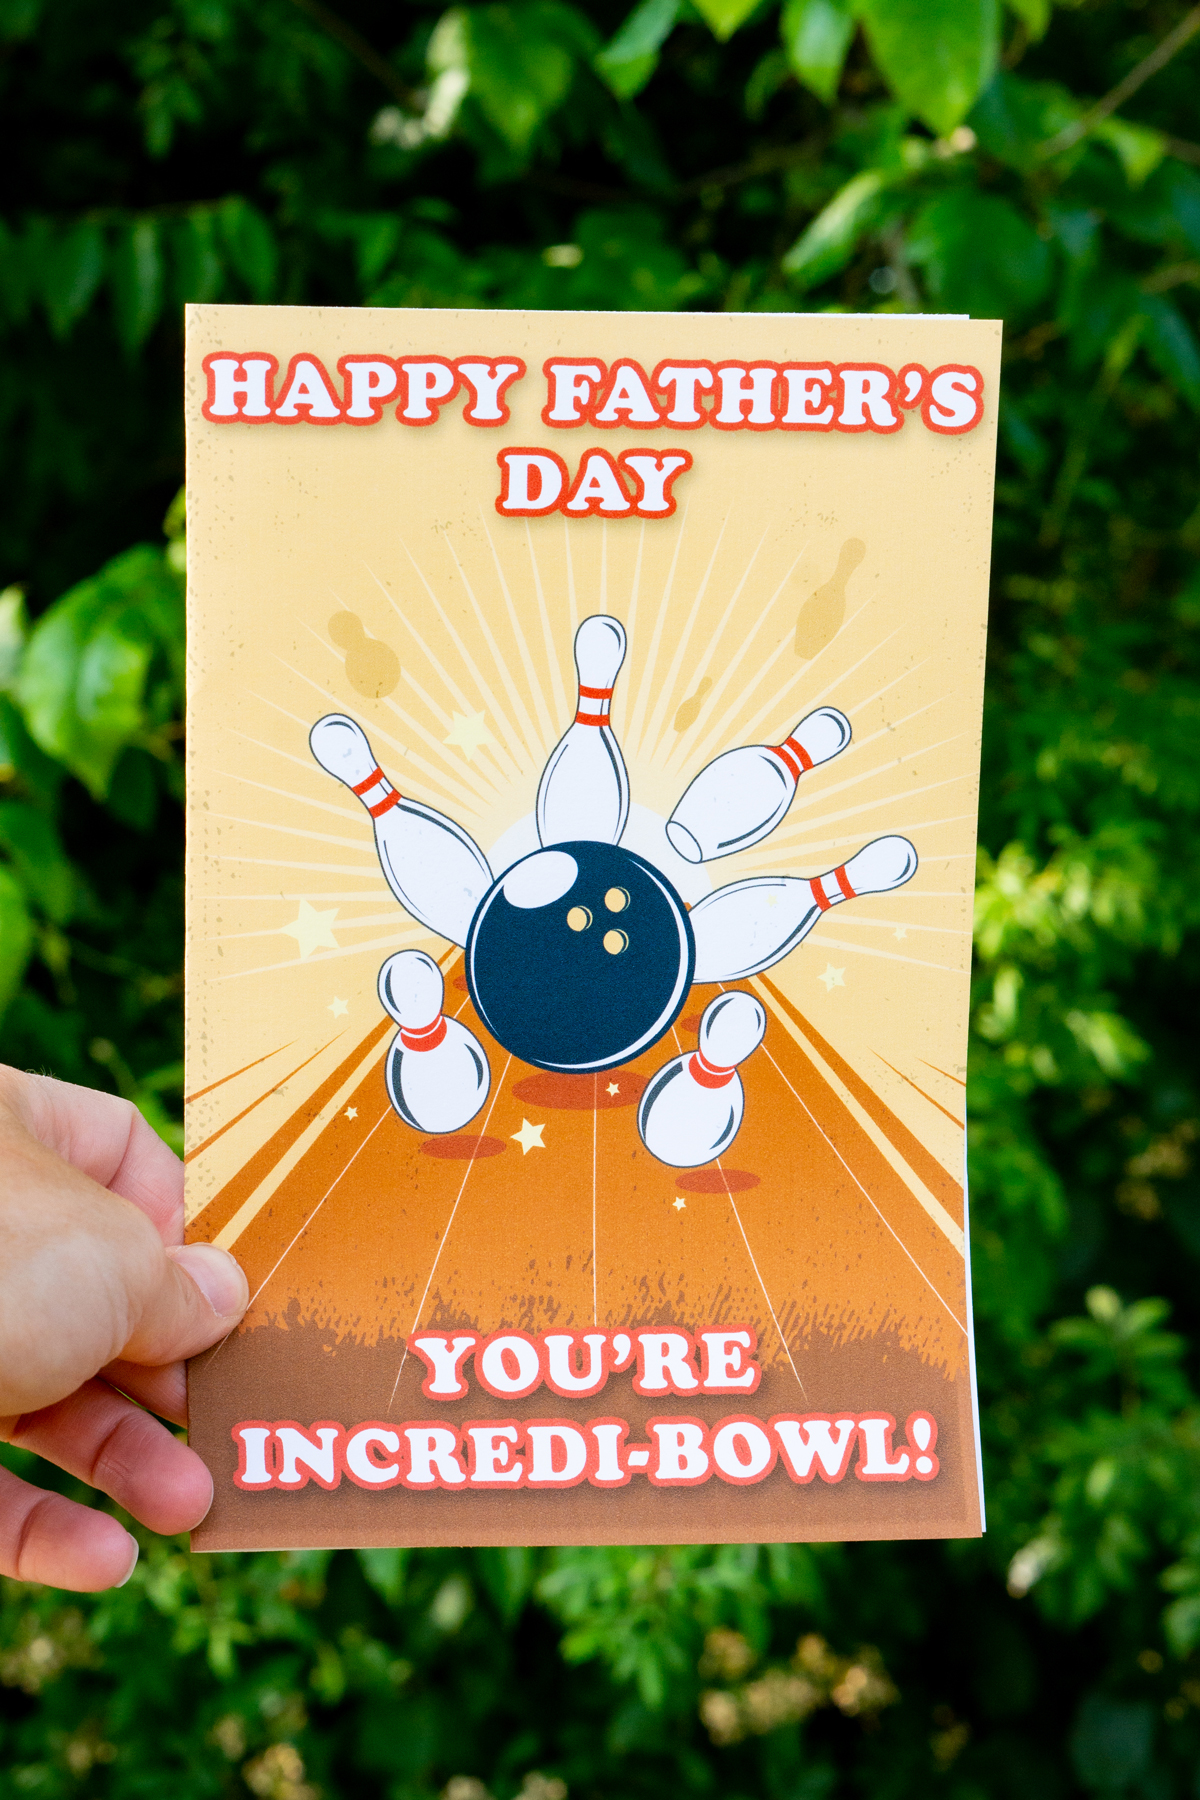 This card says "Happy Father's Day You're Incredi-bowl! It features a bowling ball knocking into pins.